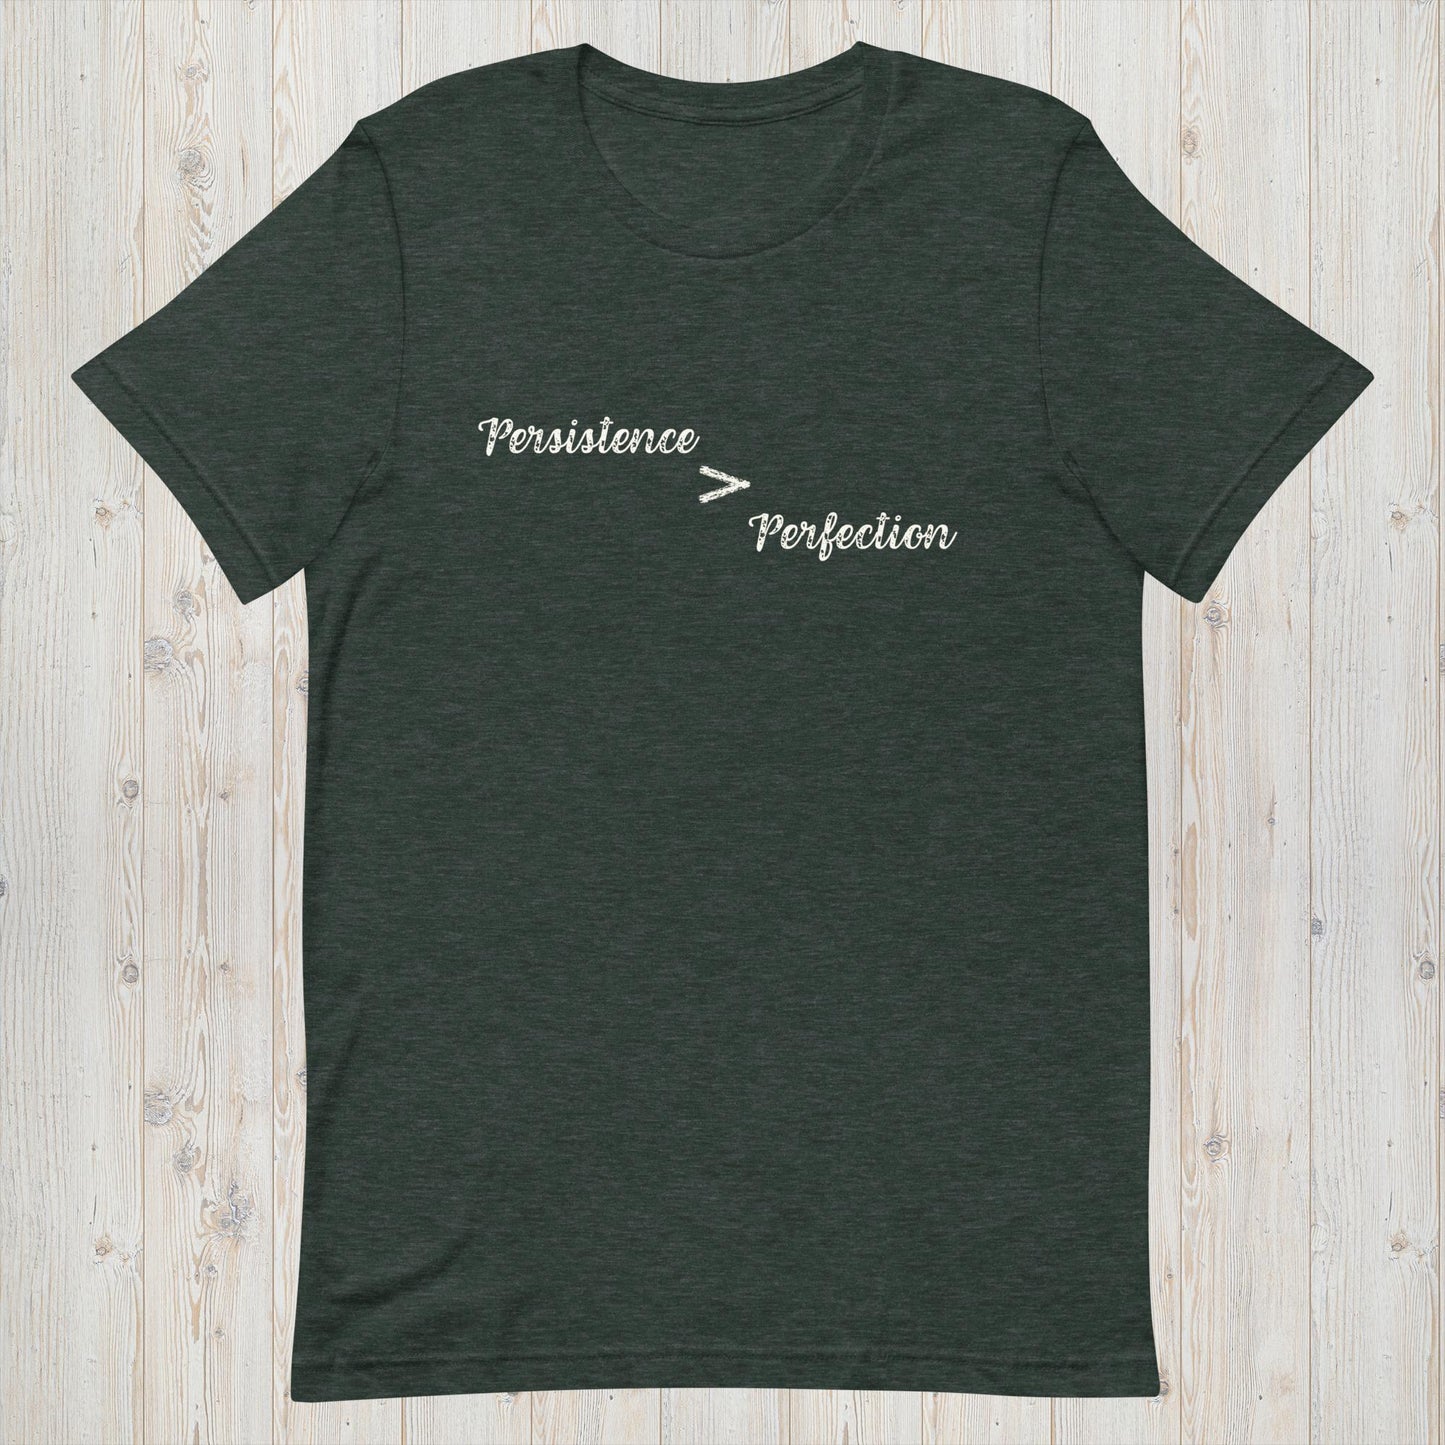 Persistence is Greater Than Perfection Motivational T-Shirt